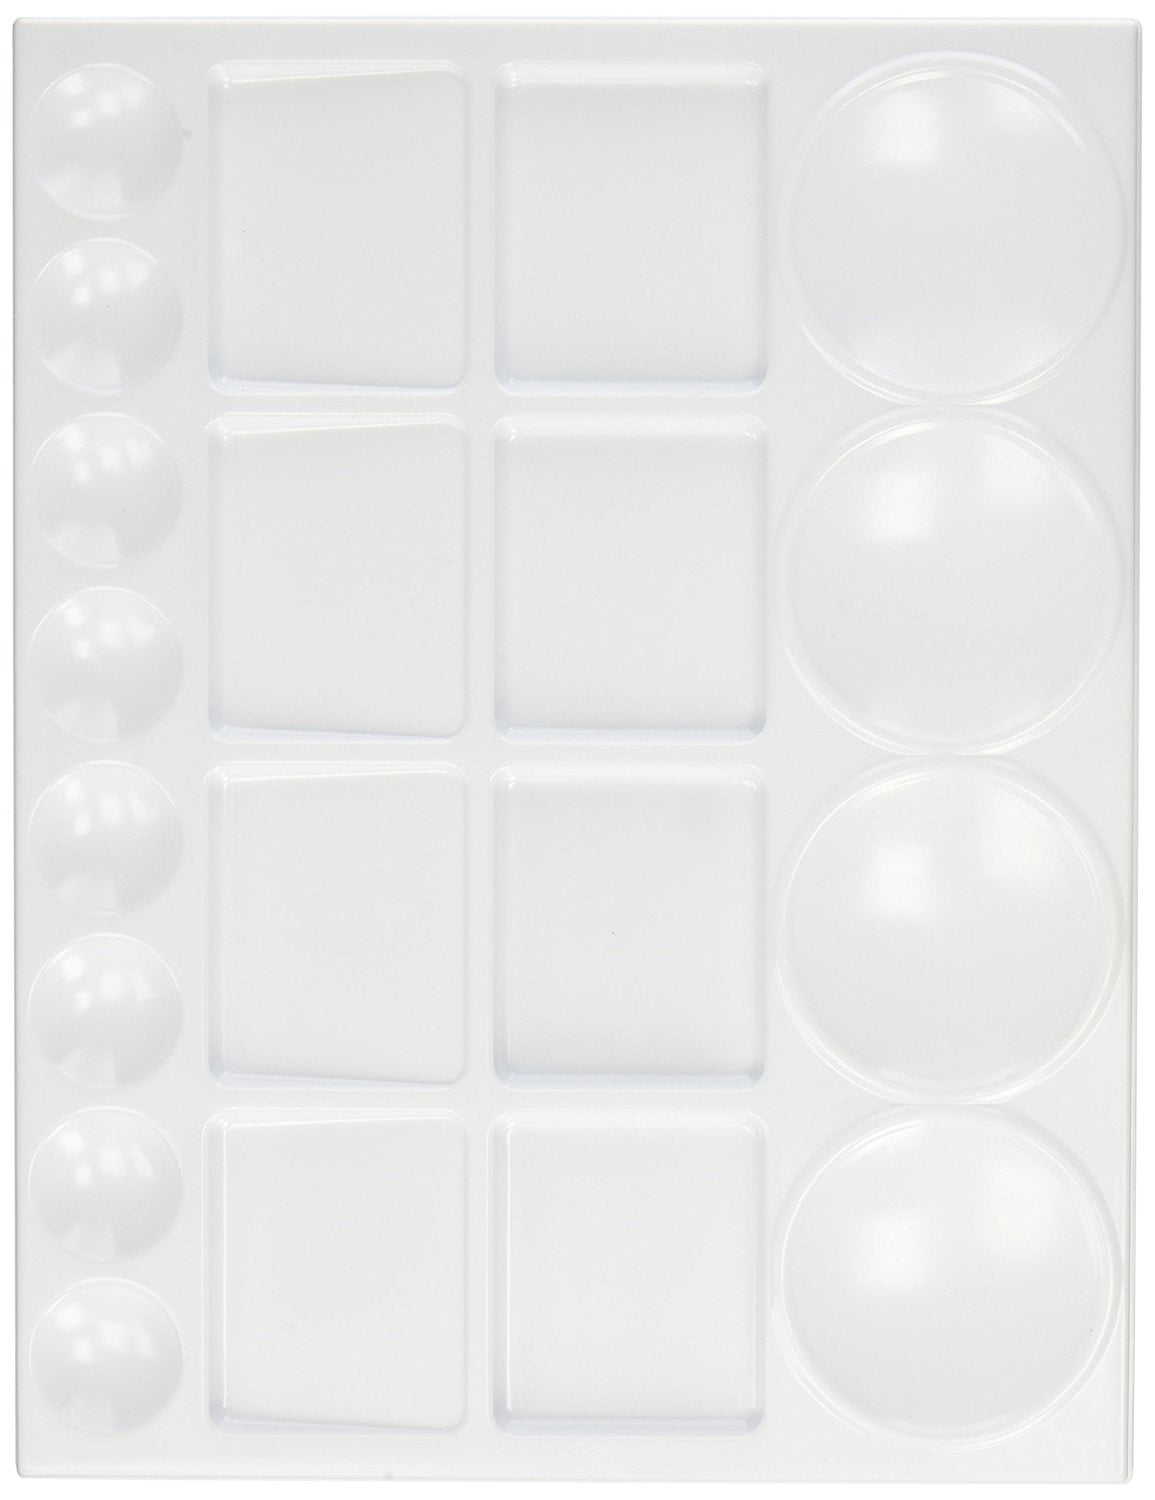 Painting Tray 3 Pieces White 10 Wells Plastic Paint Palettes, Washable  Thumb Hole Painting Tray for Acrylic Oil Craft, DIY Art